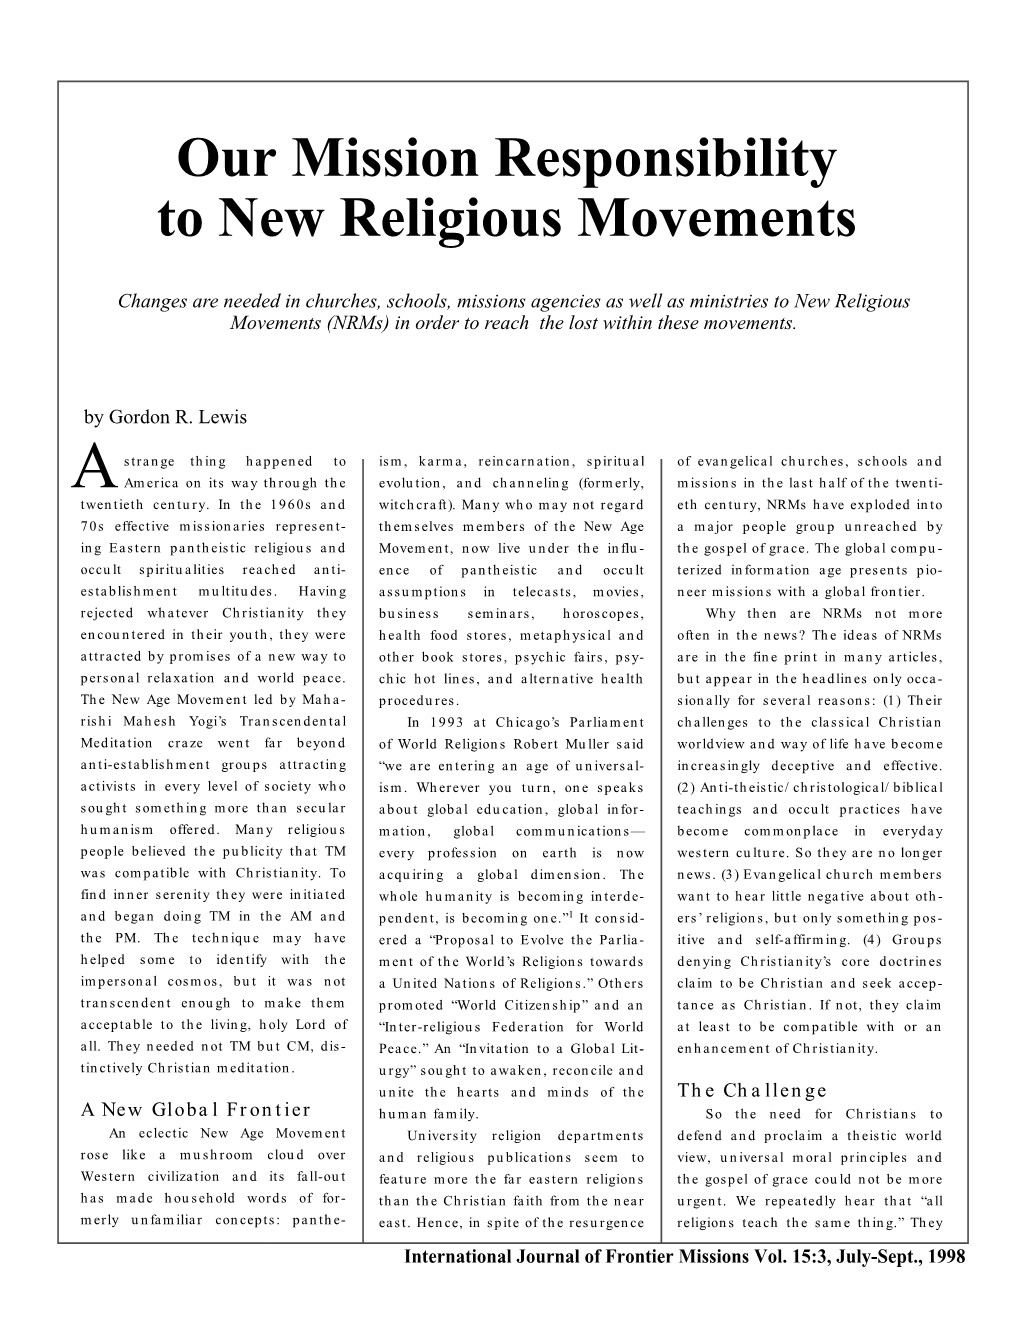 Our Mission Responsibility to New Religious Movements